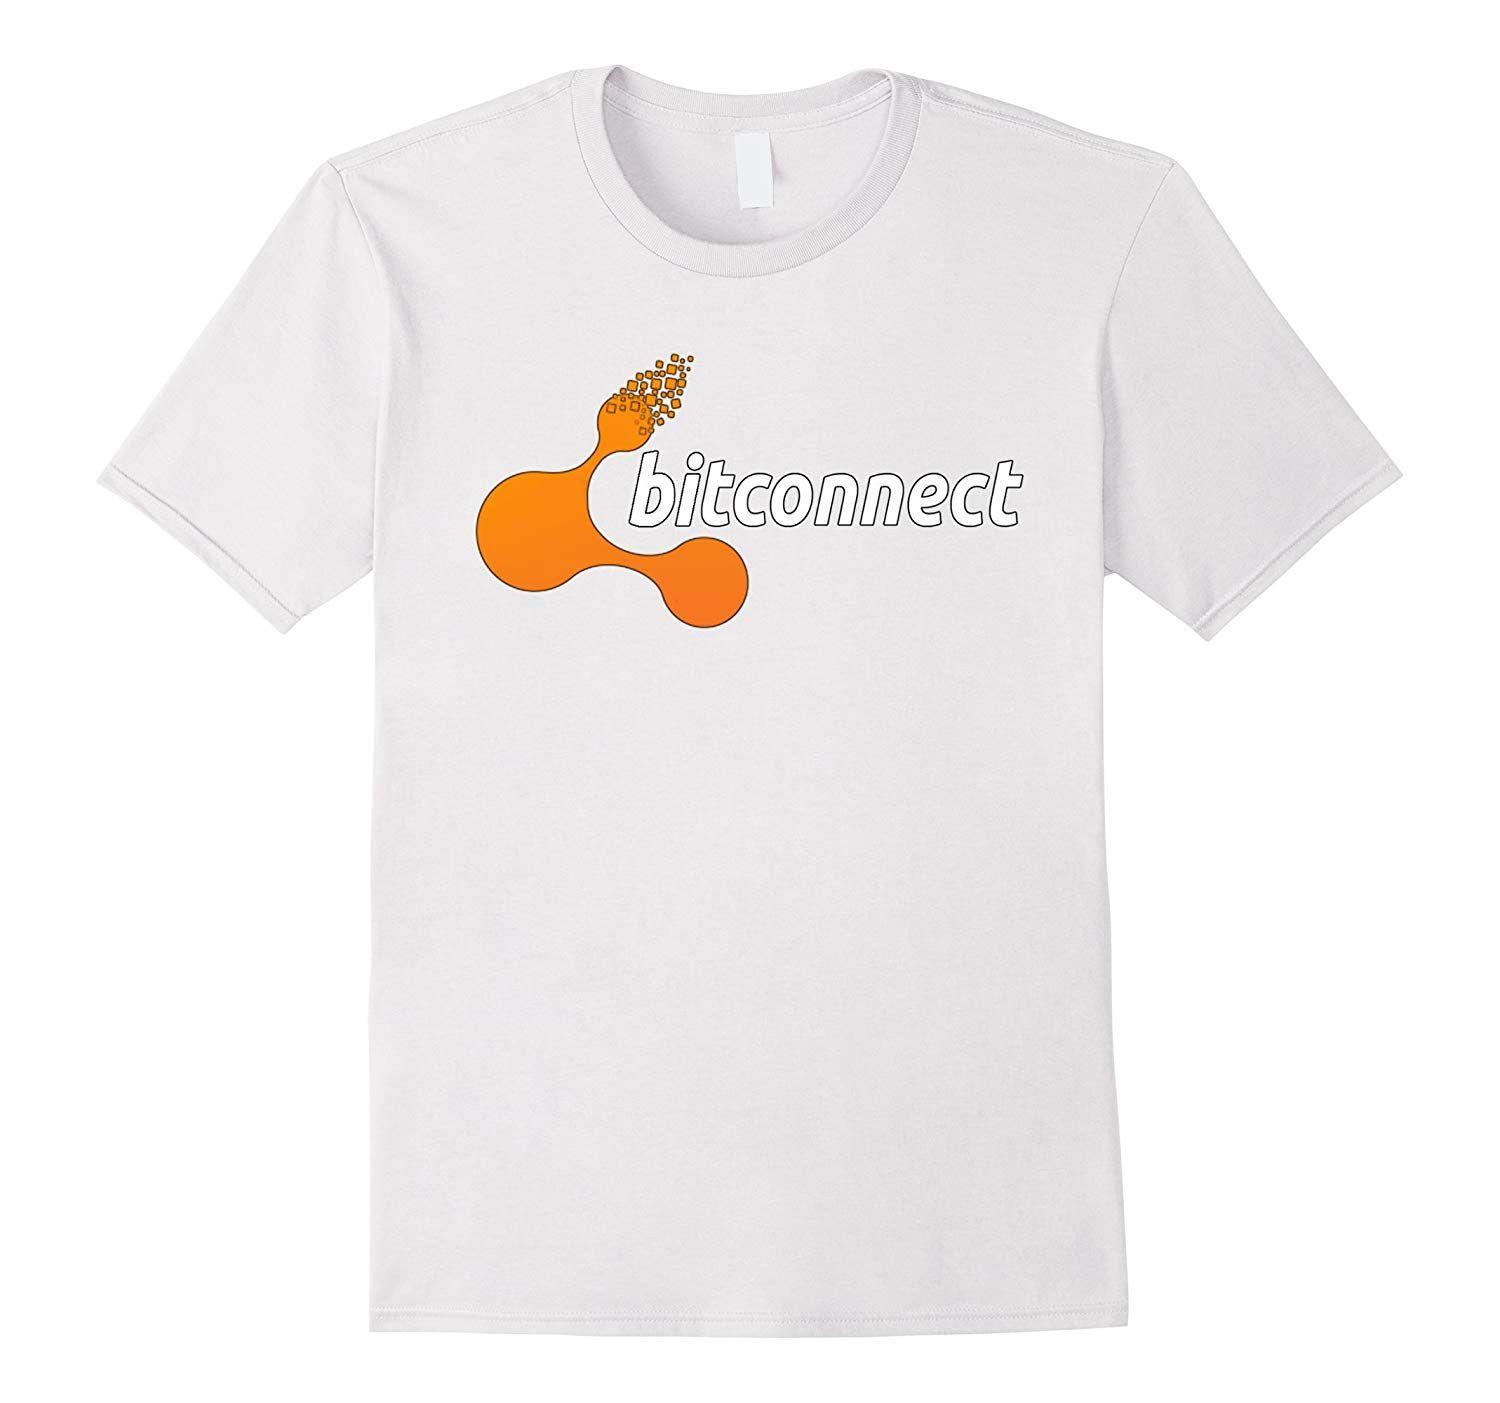 Bitconnect Logo - New Bitconnect Logo For 2017 Cryptocurrency T Shirt ANZ